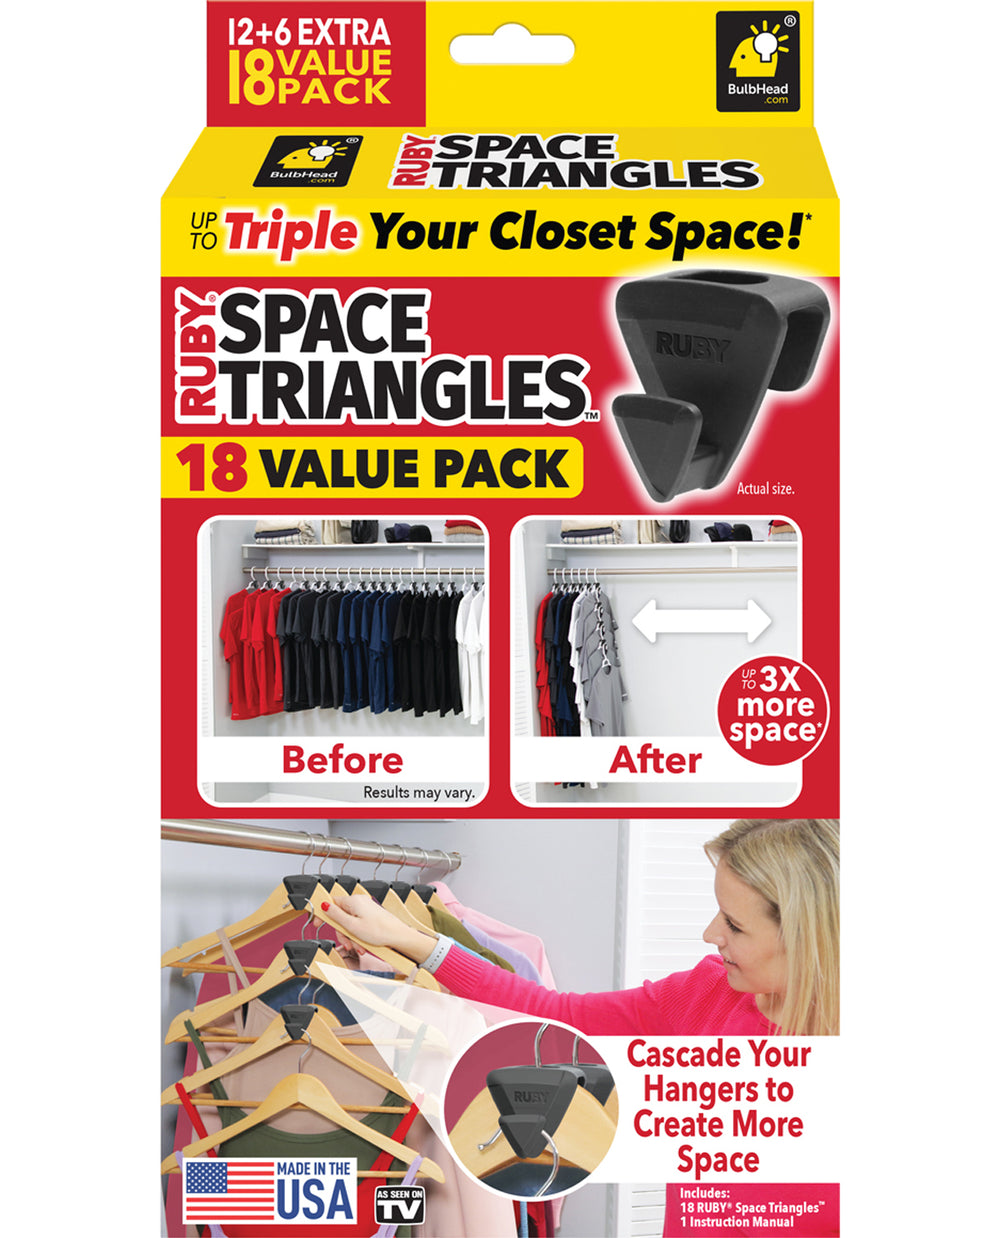 Ruby Space Triangles – Hamrick's Shop